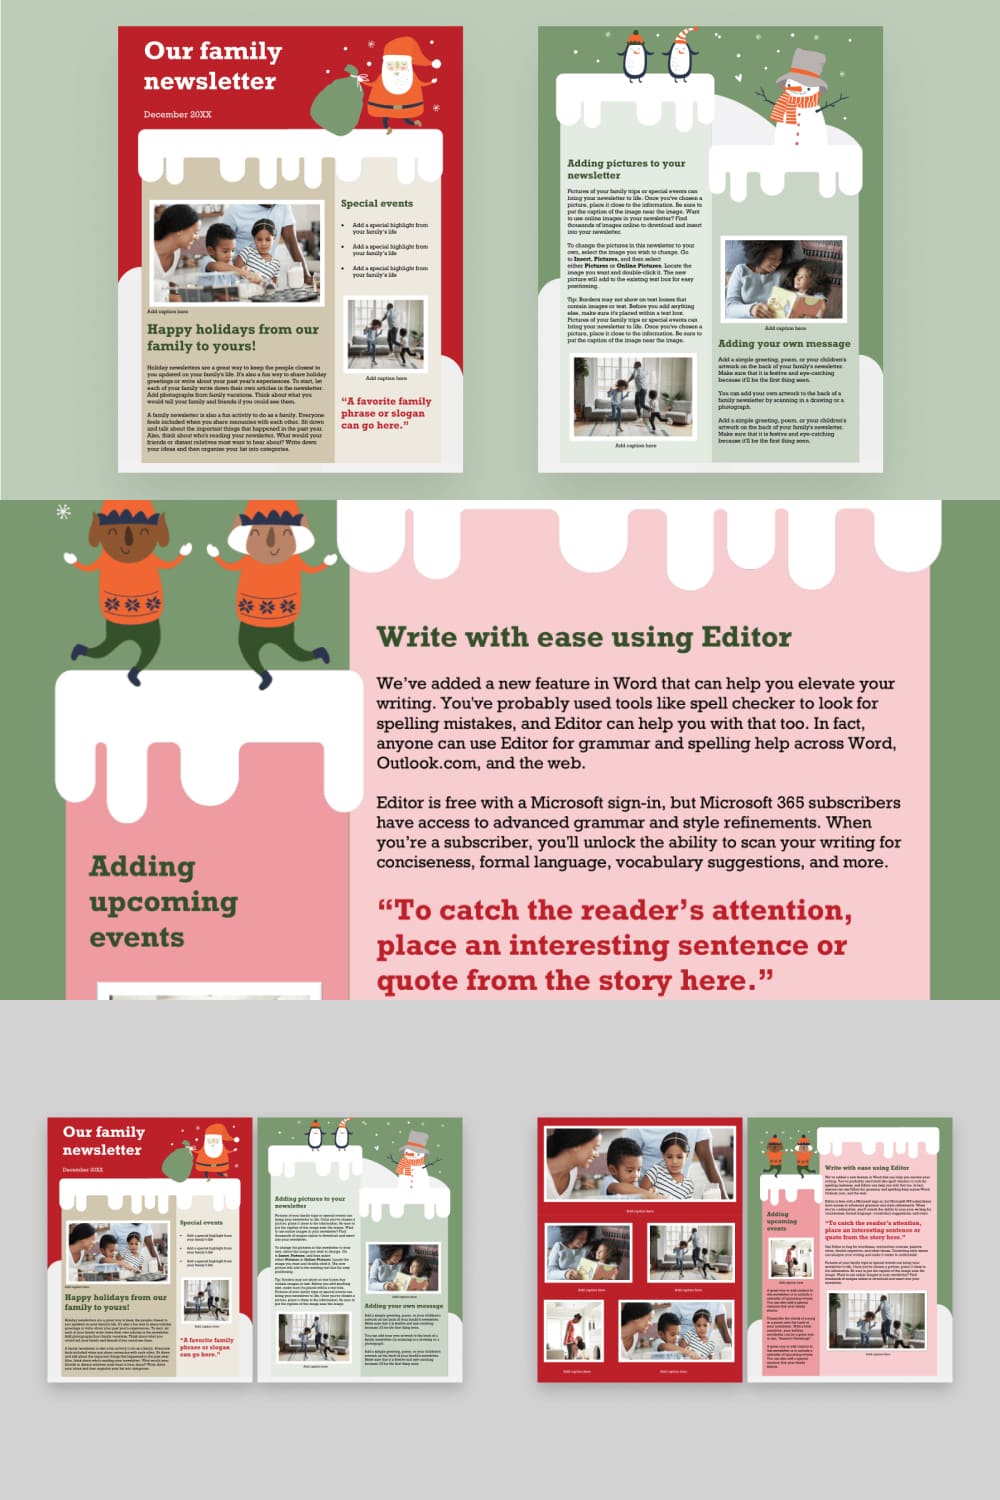 Update friends and family on your family’s latest news and events and create a newsletter with an engaging and fully designed Christmas newsletter template.